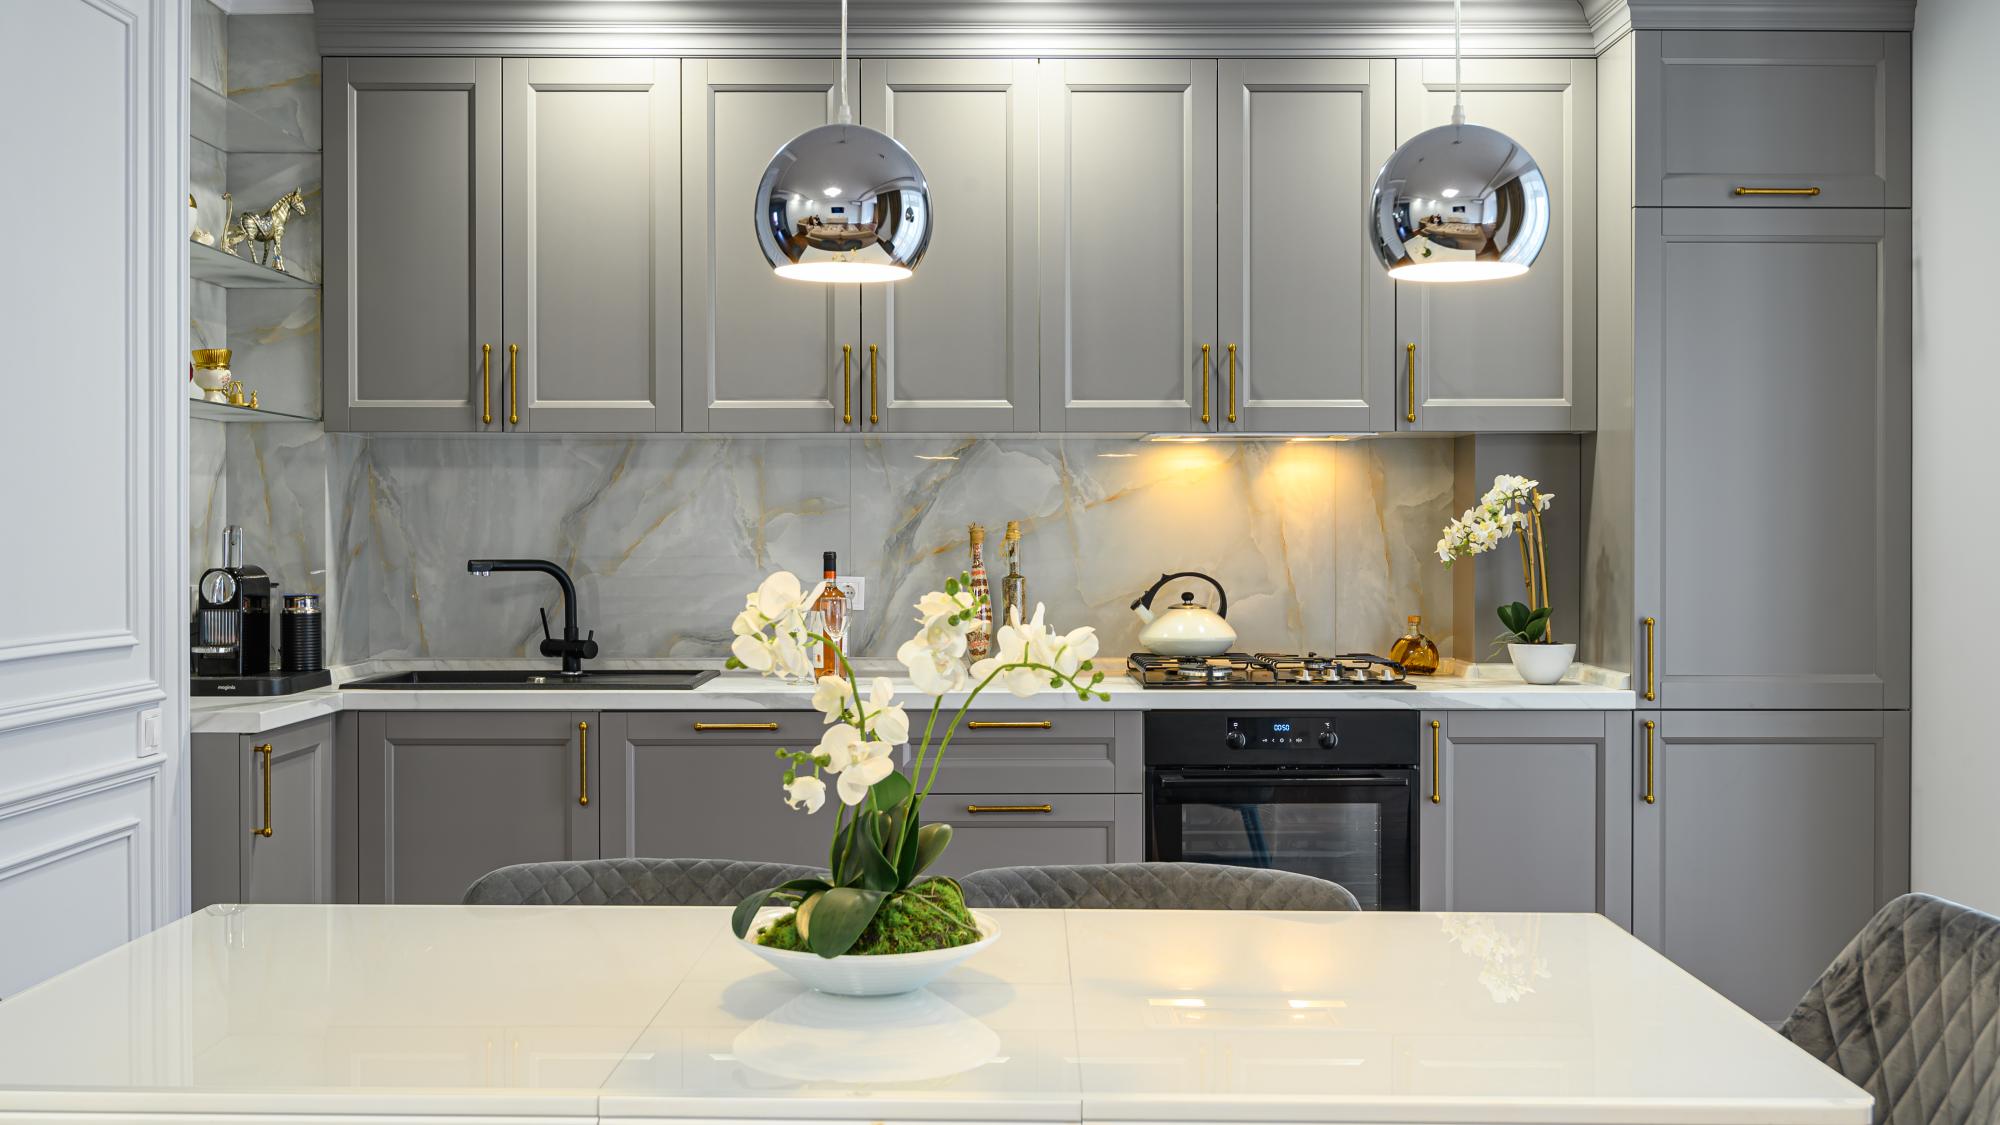 Why You Choose Our Kitchen Remodeling Service